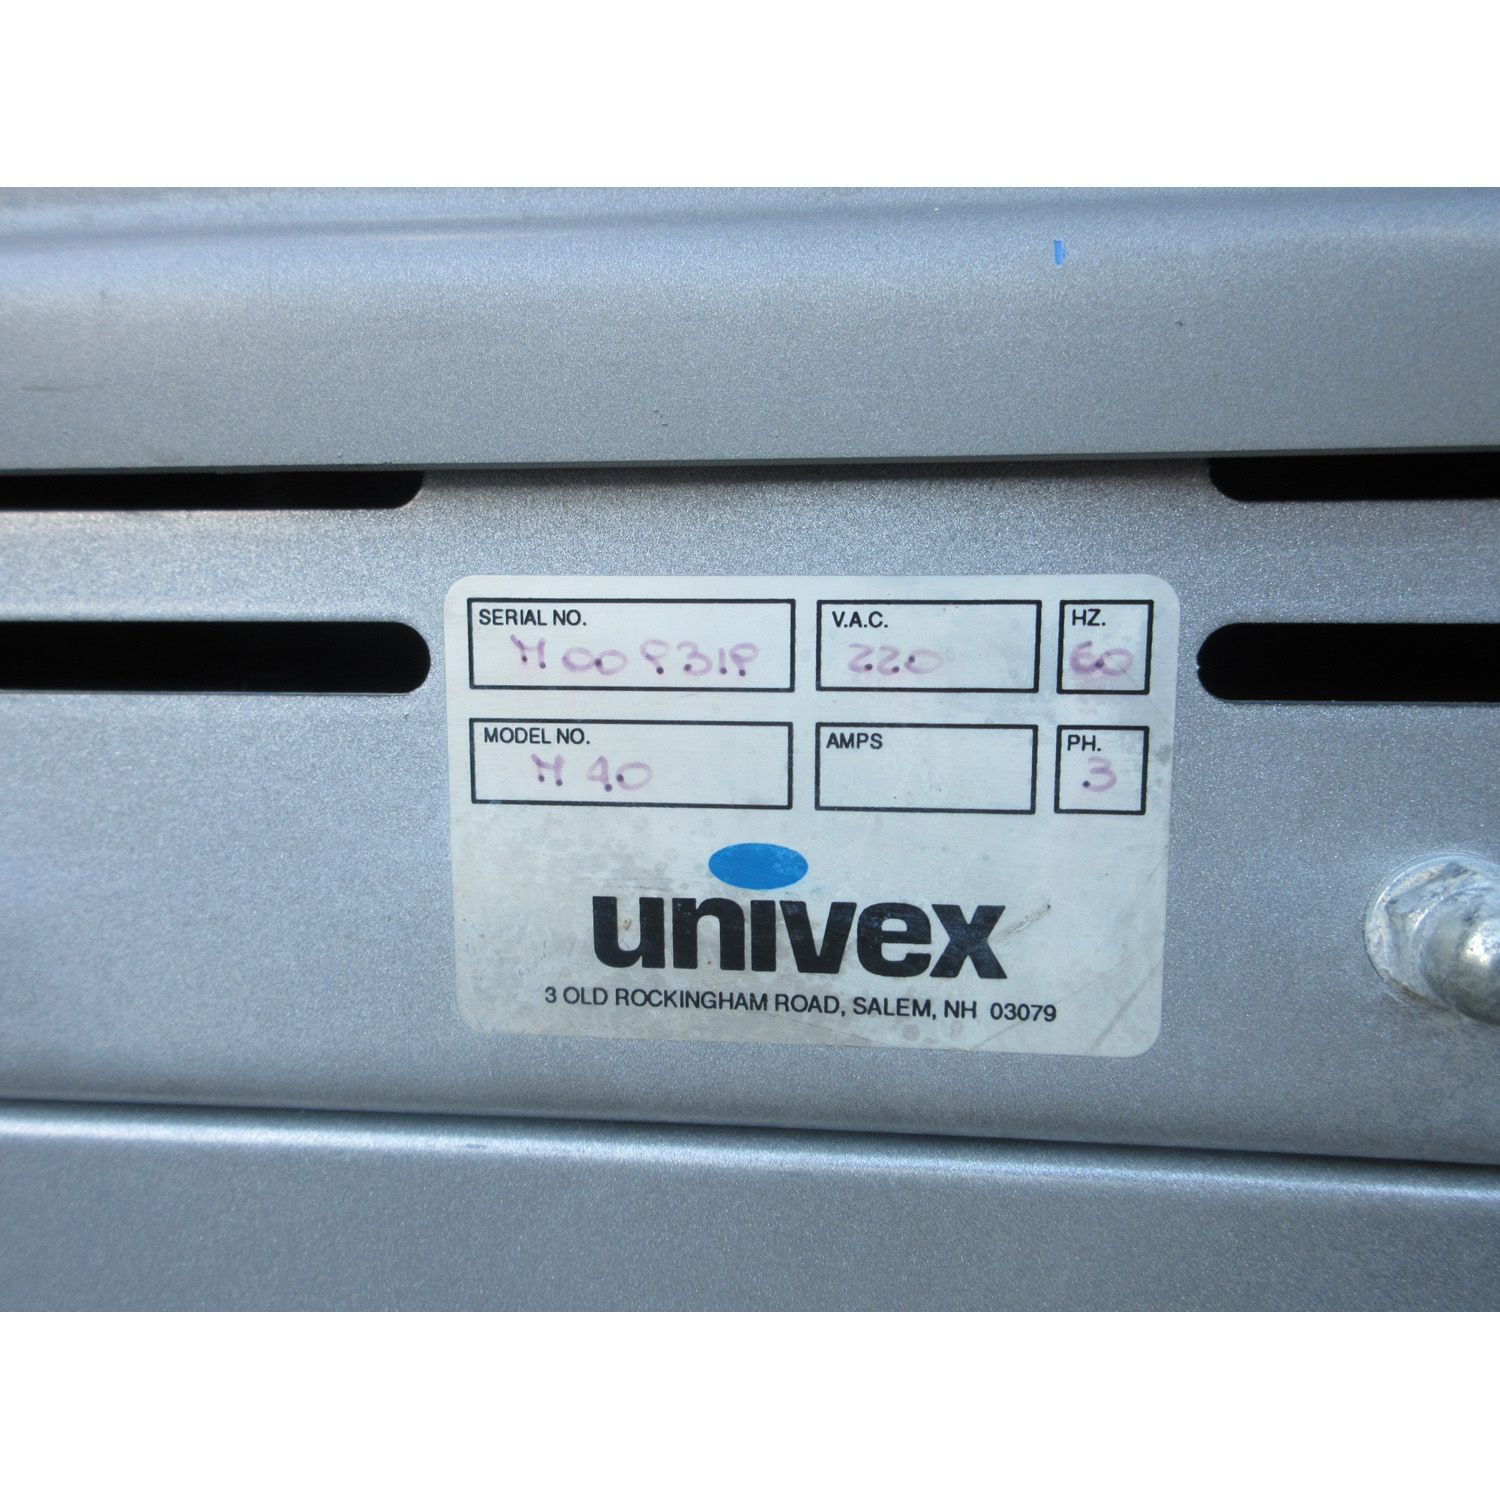 Univex M40 90 Pounds Spiral Mixer, Used Great Condition image 5